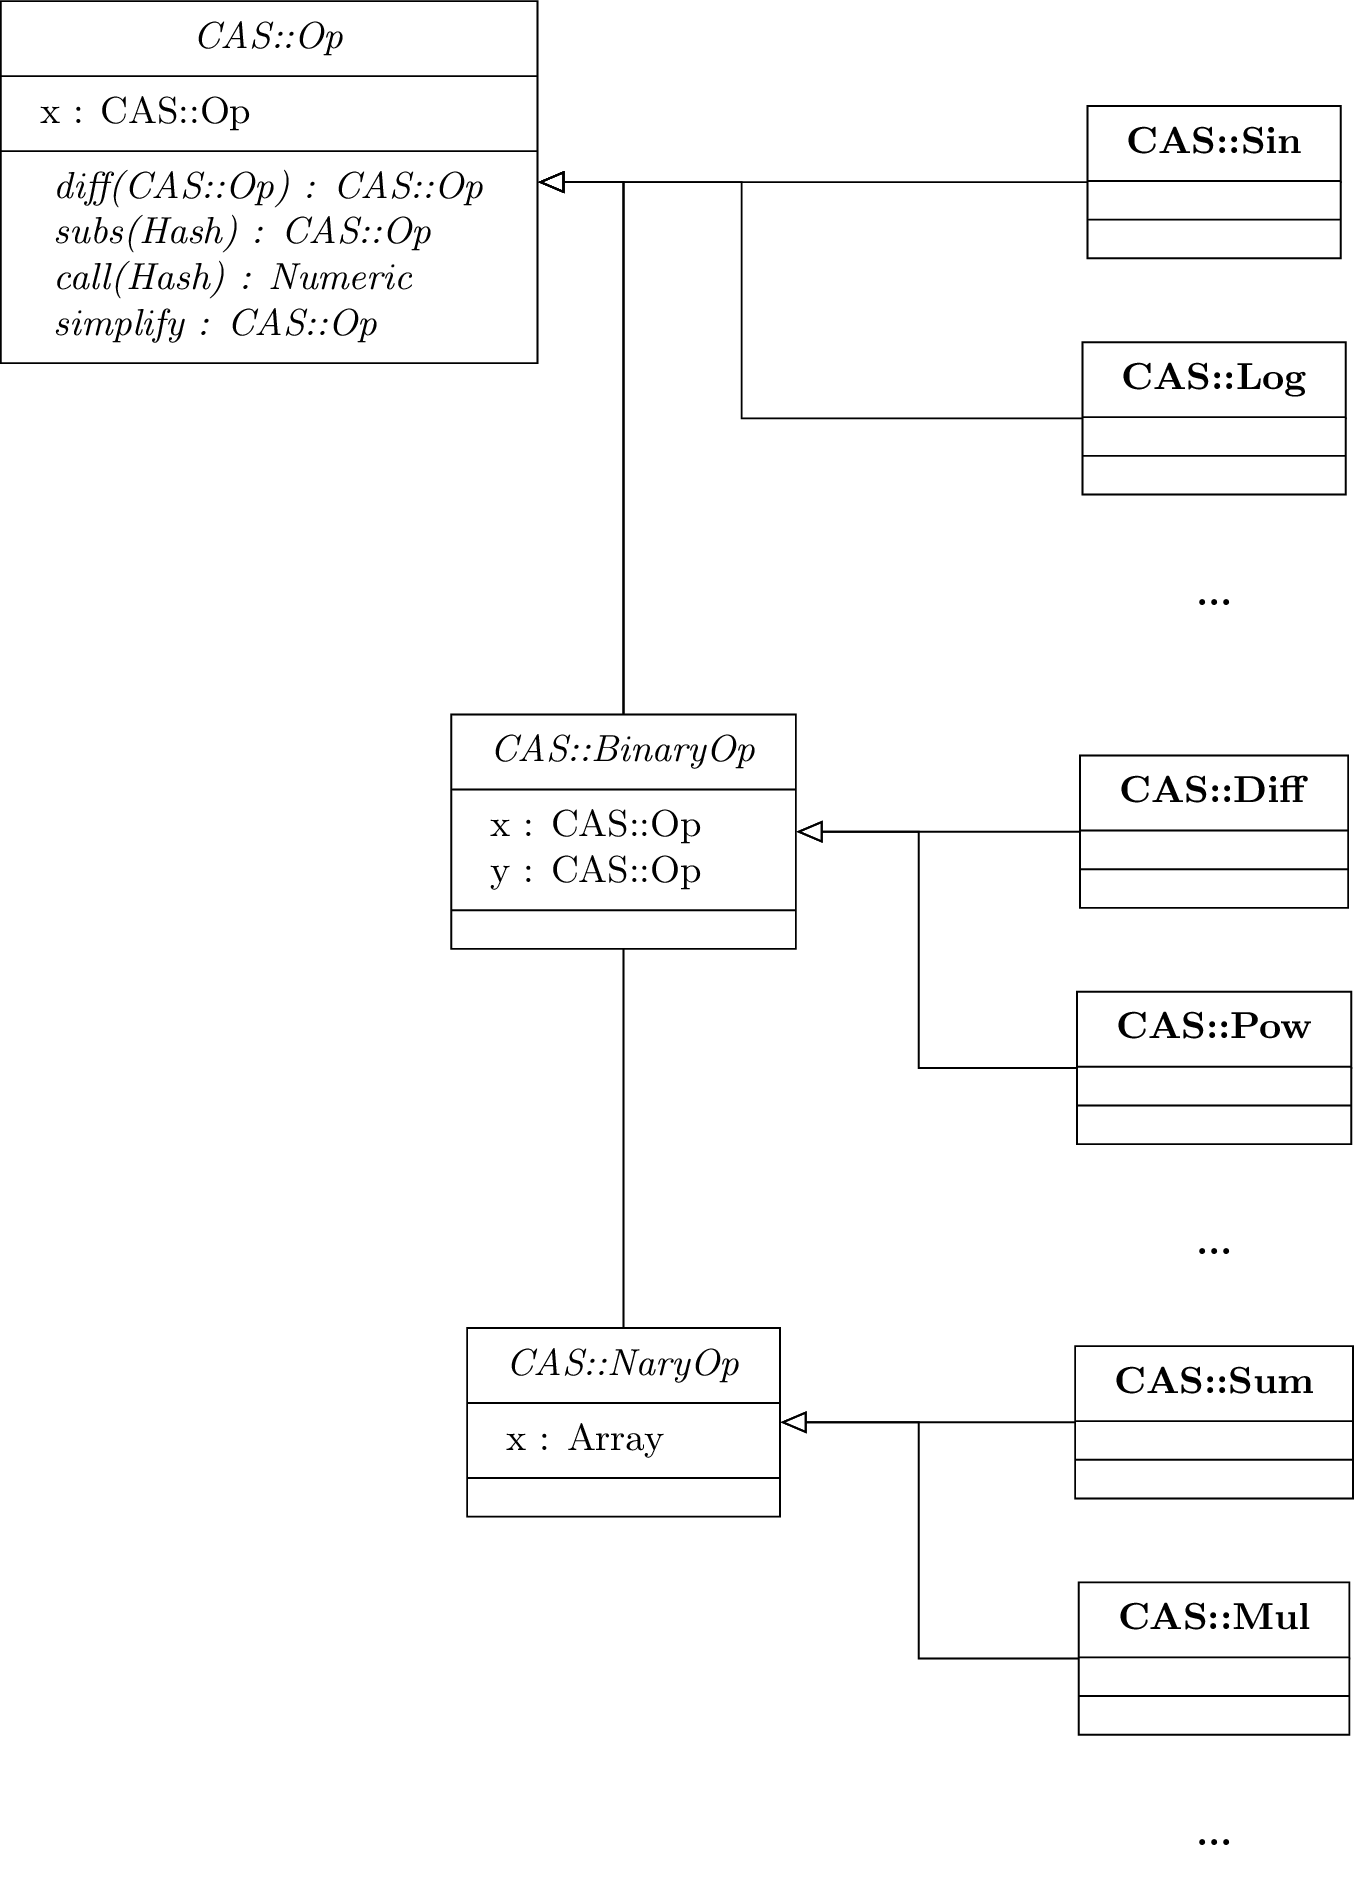 [fig:uml-container]Reduced version of classes interface and inheritance. The figure depicts the basic abstract class CAS::Op, from which the single argument operations inherit. CAS::Op is also the ancestor for other kind of containers, namely the CAS::BinaryOp and CAS::NaryOp, the models of container with two and more arguments